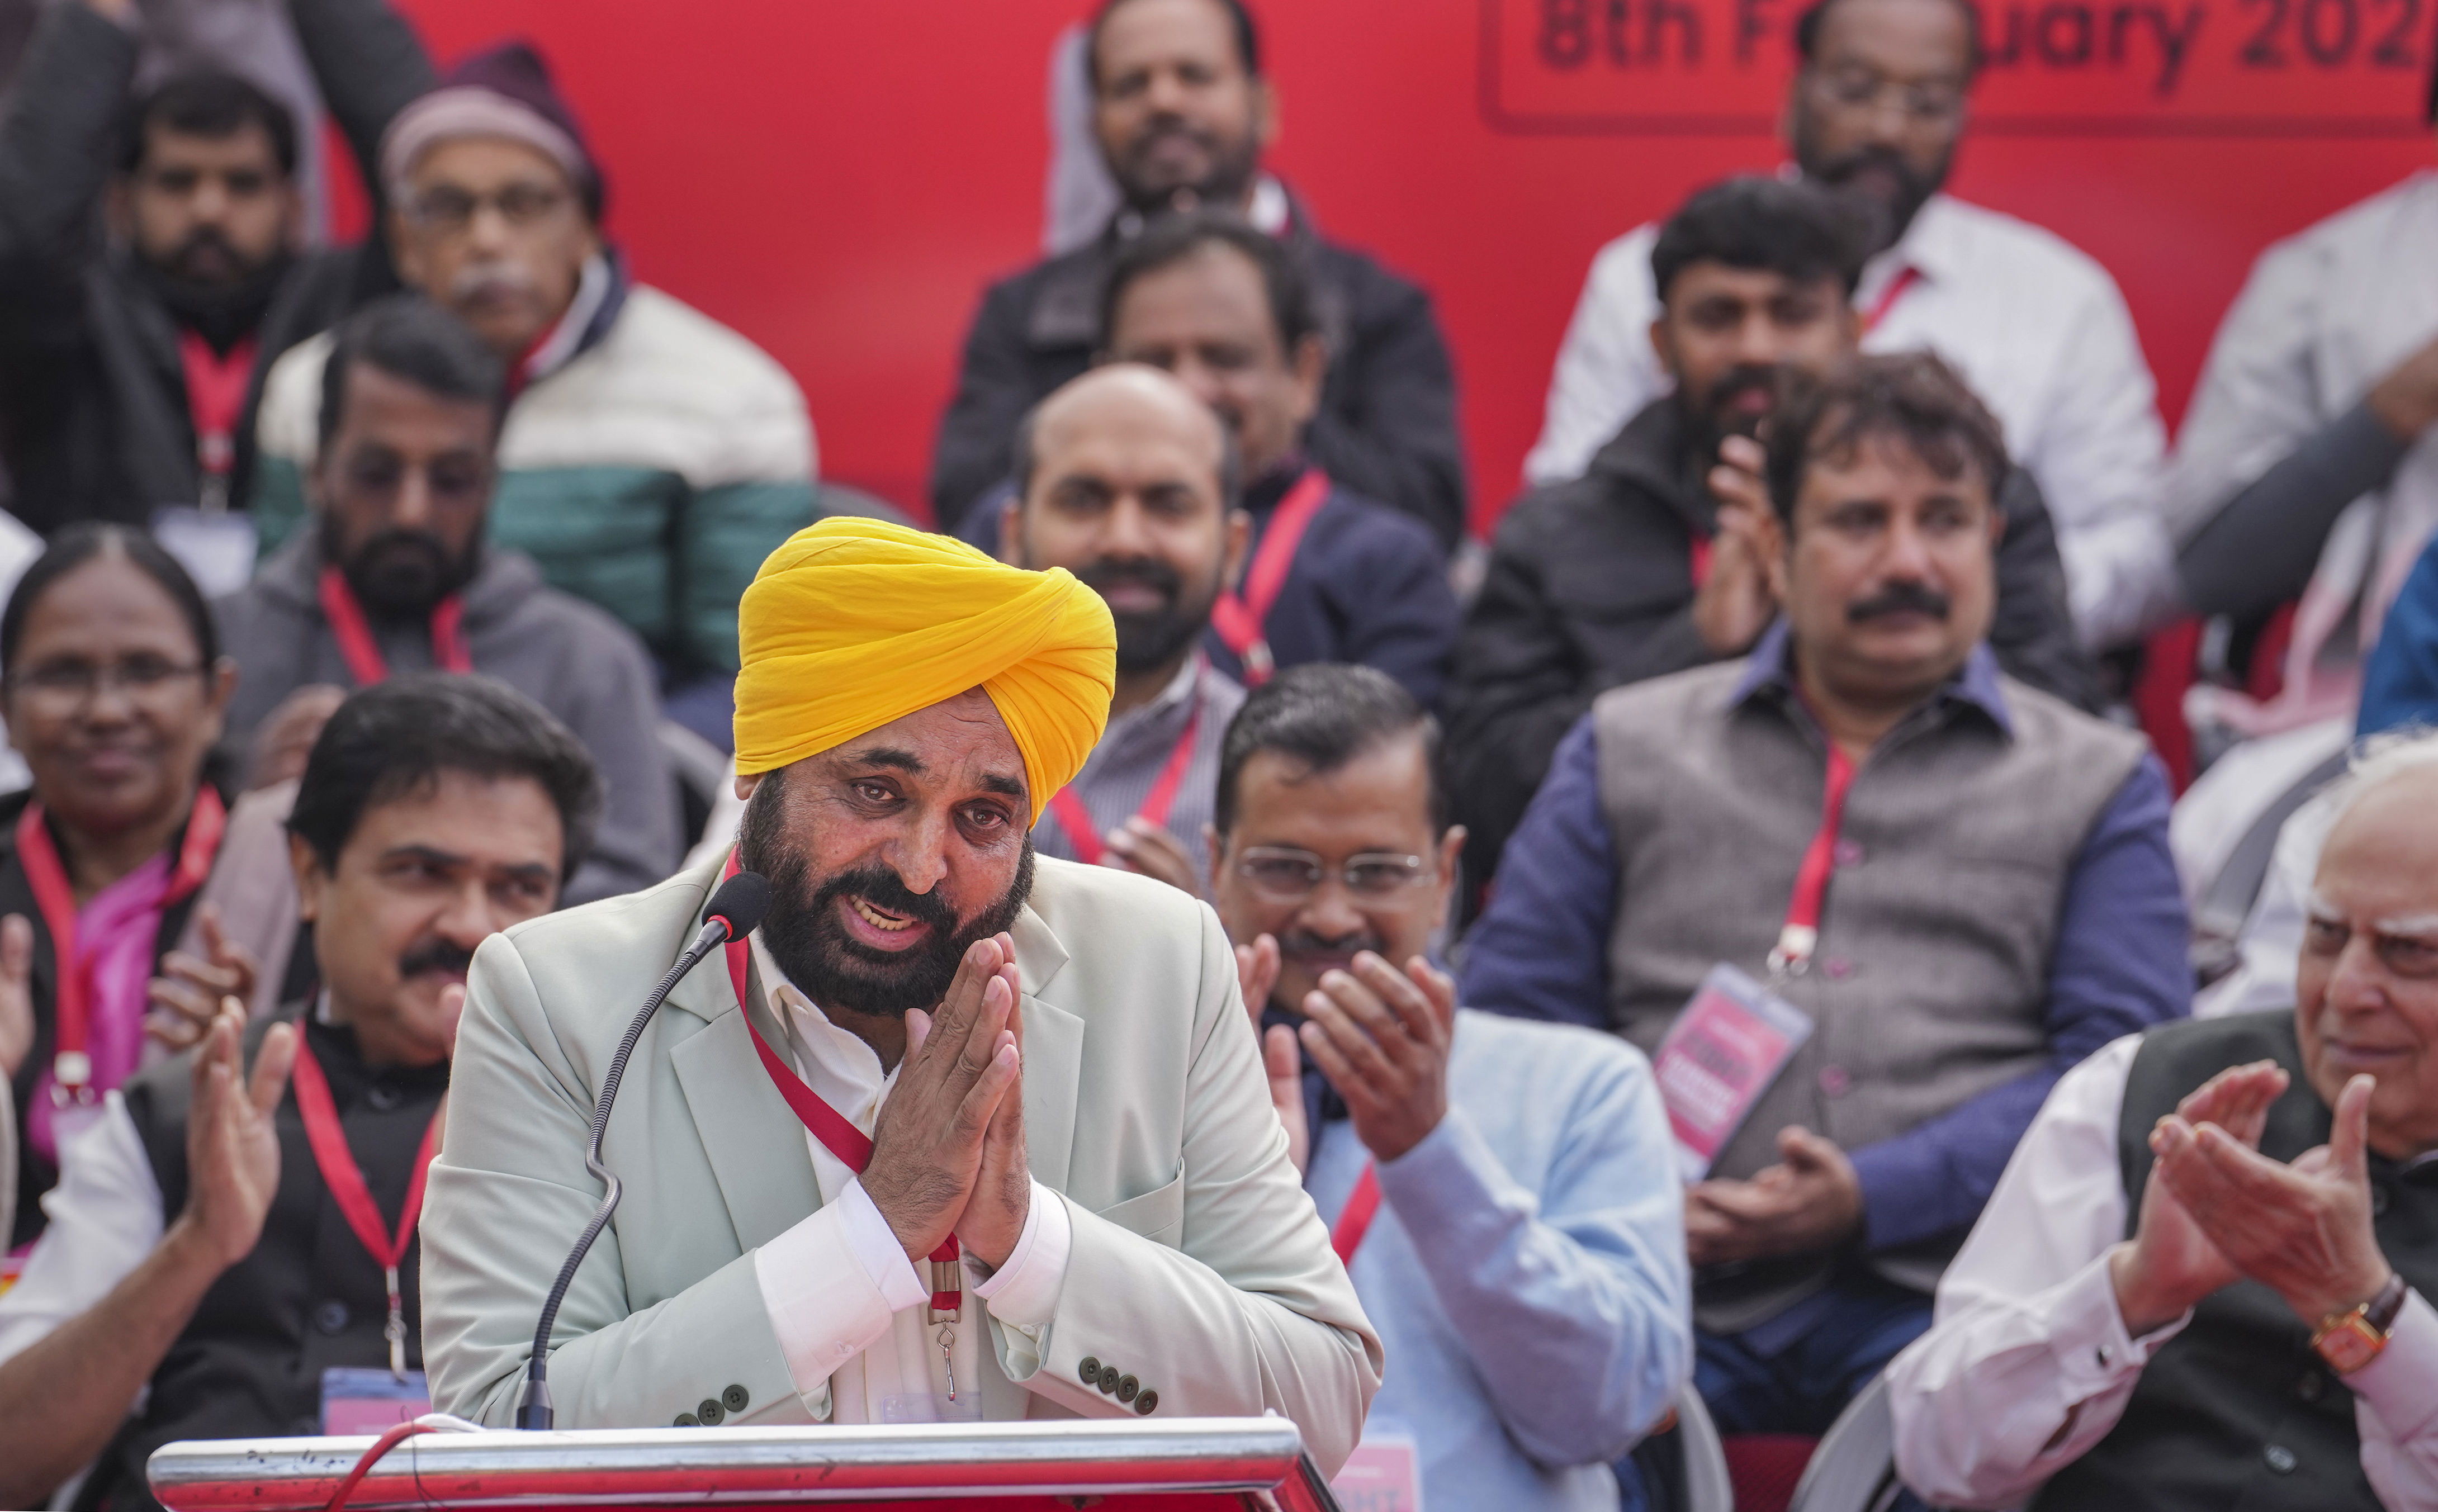 only those elected will rule in democracy: bhagwant mann at ldf protest